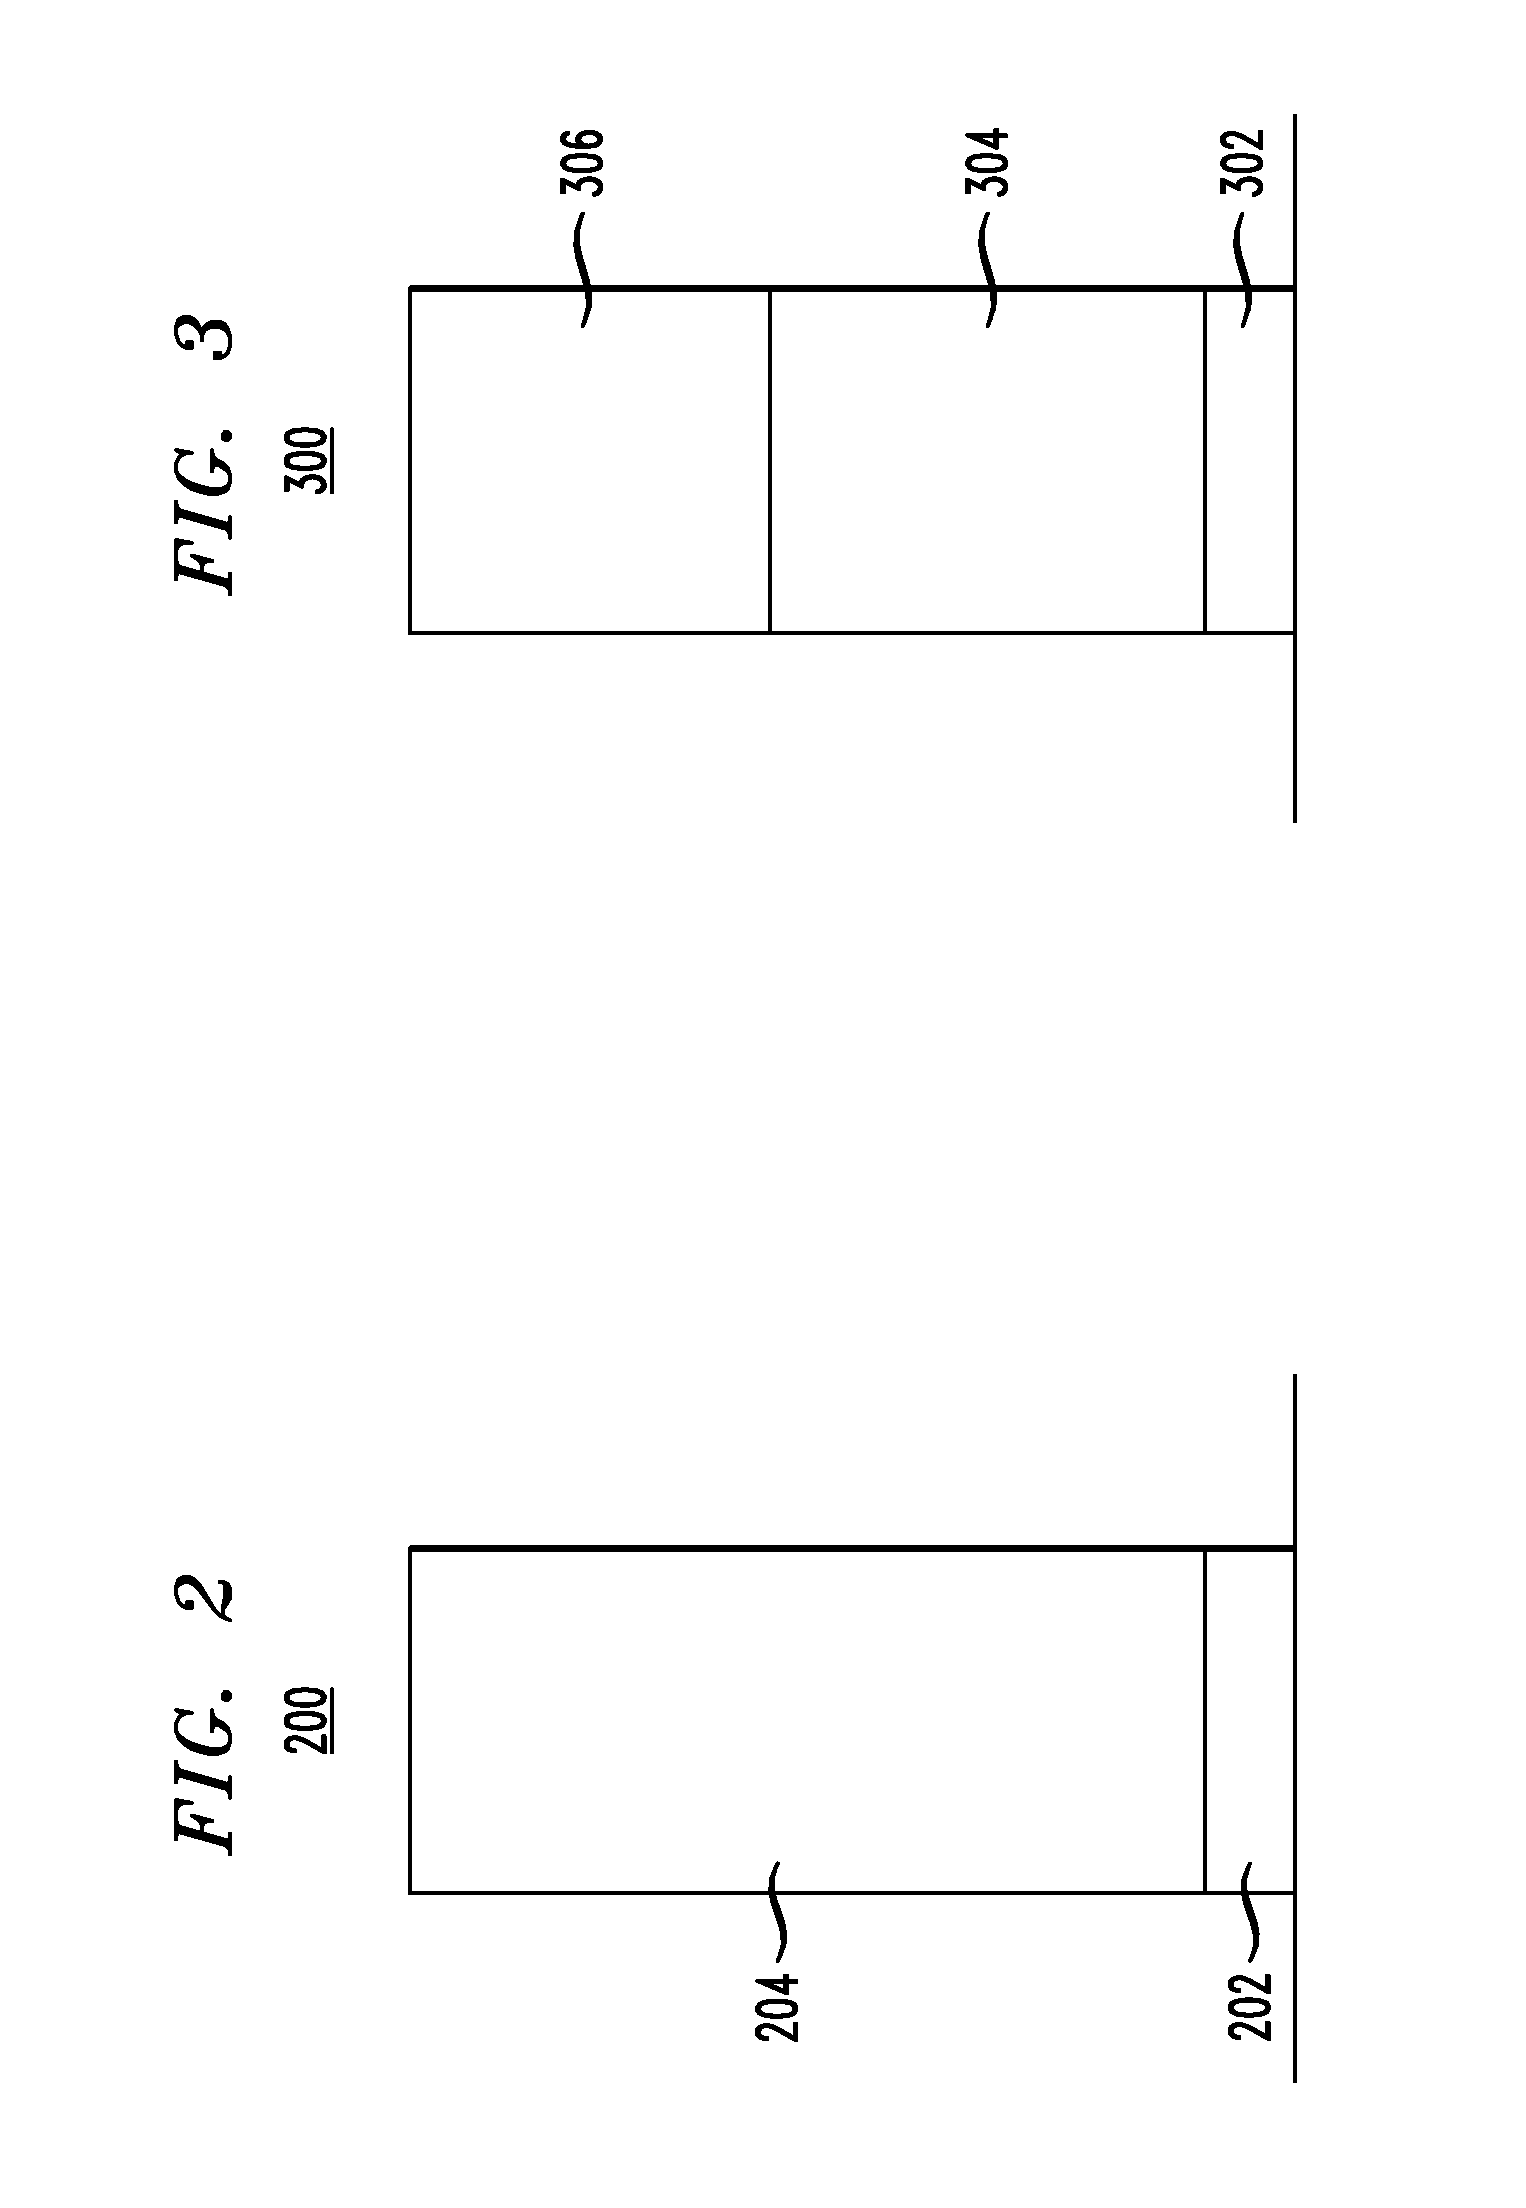 Embedded DRAM integrated circuits with extremely thin silicon-on-insulator pass transistors